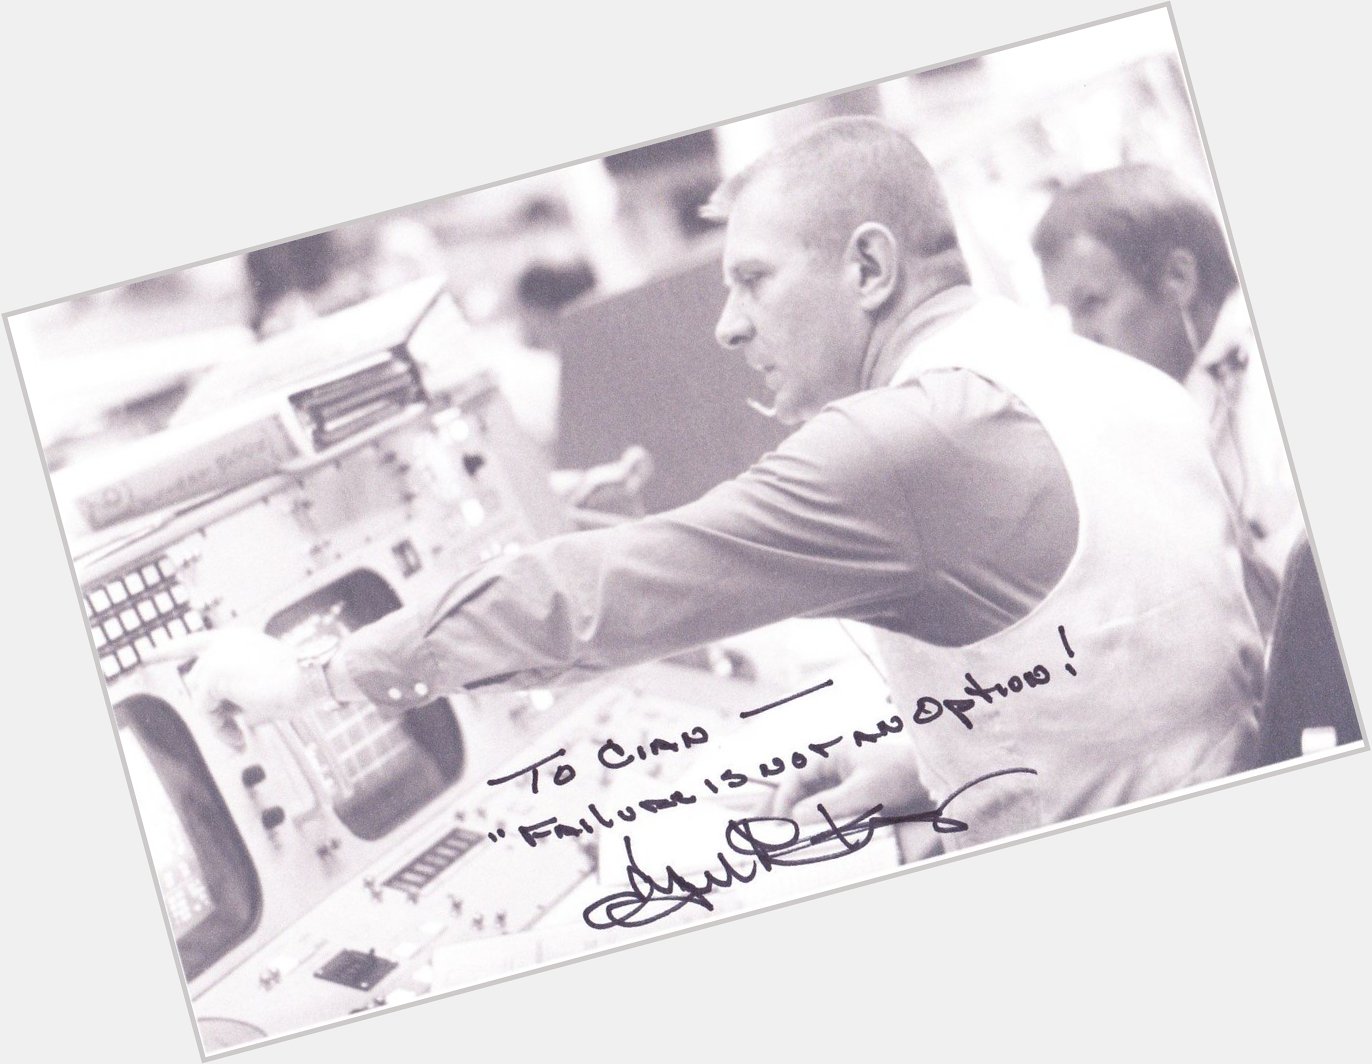 \"Failure is not an option!\"

Happy birthday to former NASA Flight Director, and personal hero of mine, Gene Kranz! 